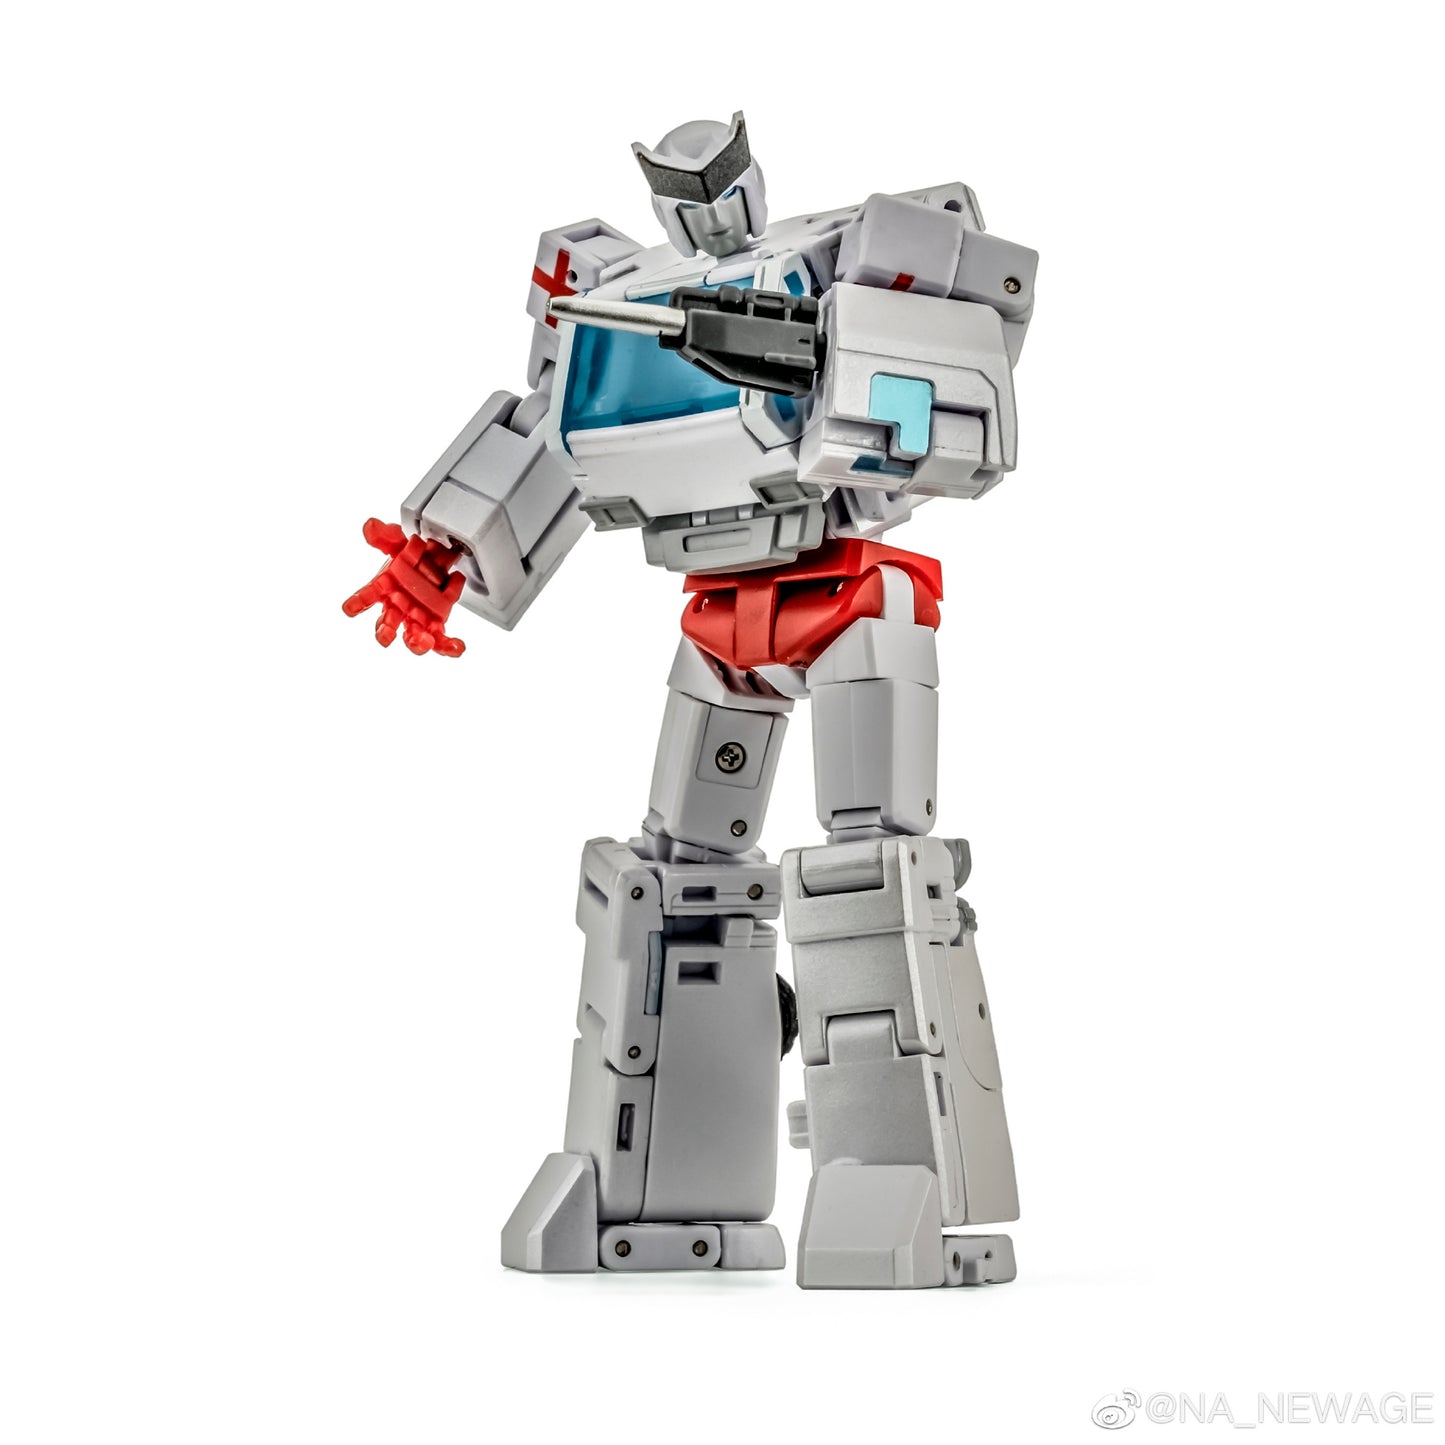 This ER 2.0 figure stands just under 4 inches tall and features some die-cast parts for a more durable and heavy feel. Several accessories are included for more display options.